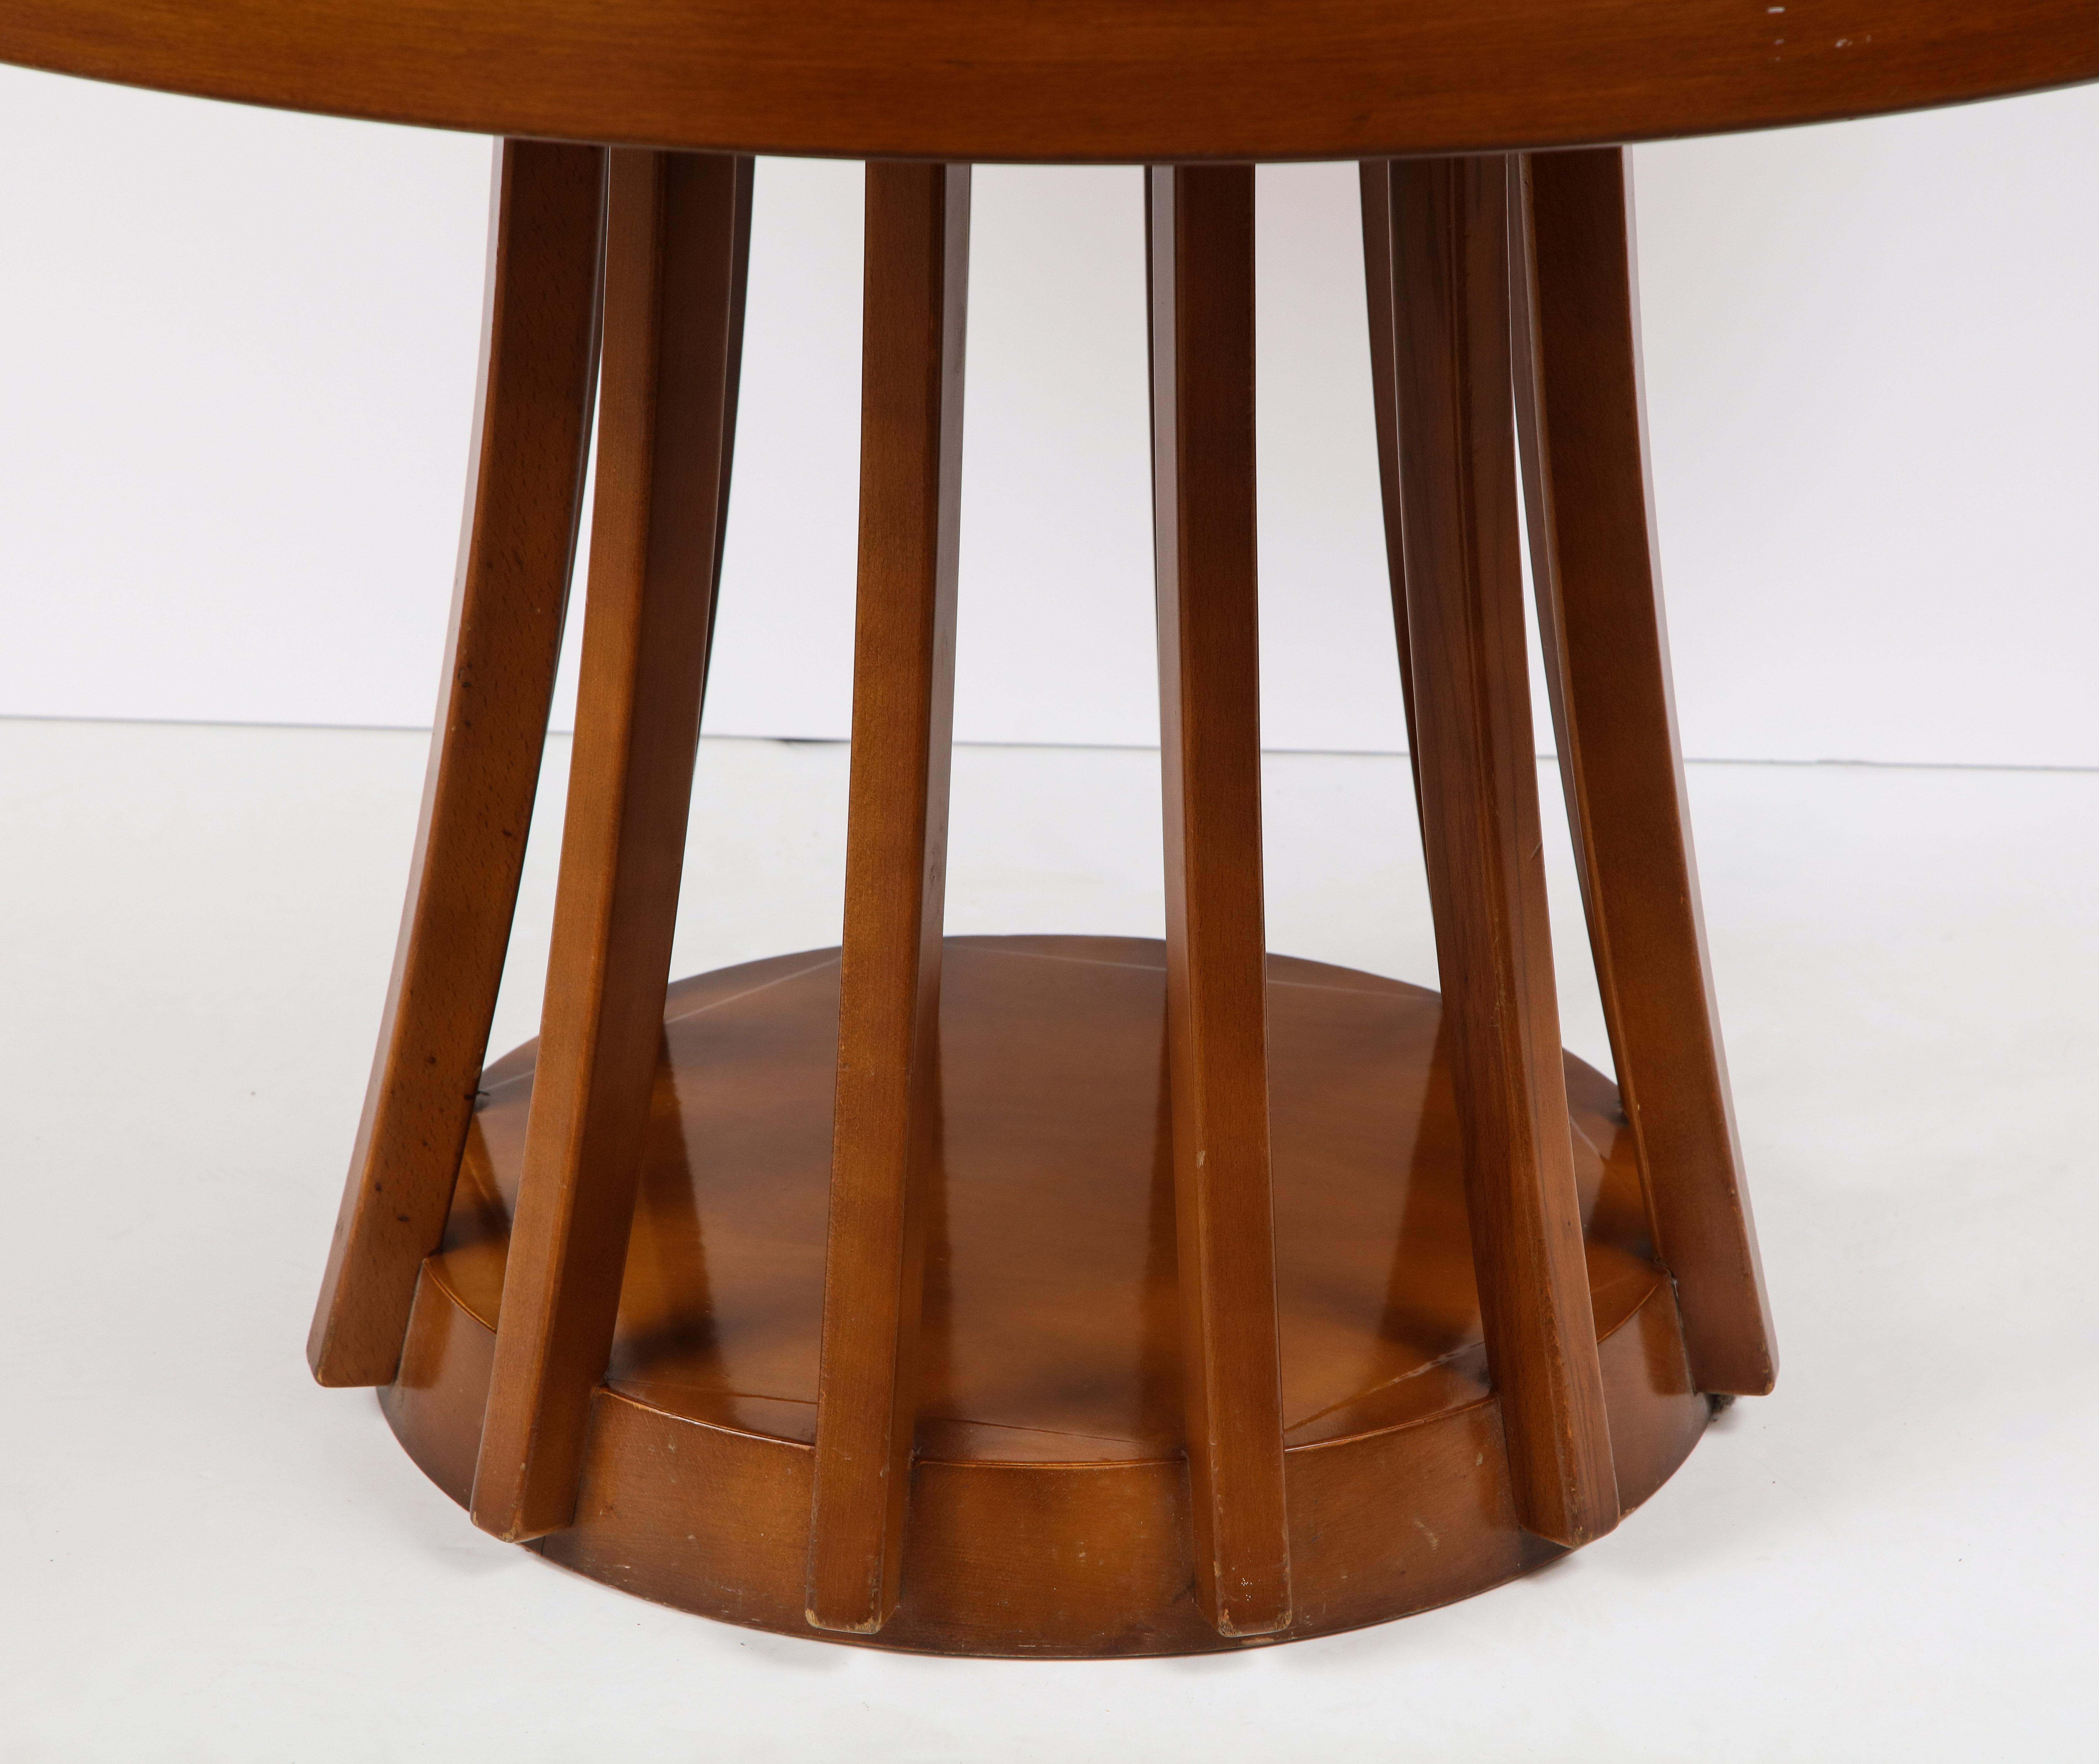 An extendable mahogany center or dining table by Angelo Mangiarotti, manufactured by La Sorgente Dei Mobili, 1972. 
The twelve legs connected by a circular base support the top. 
Size: 27 3/4